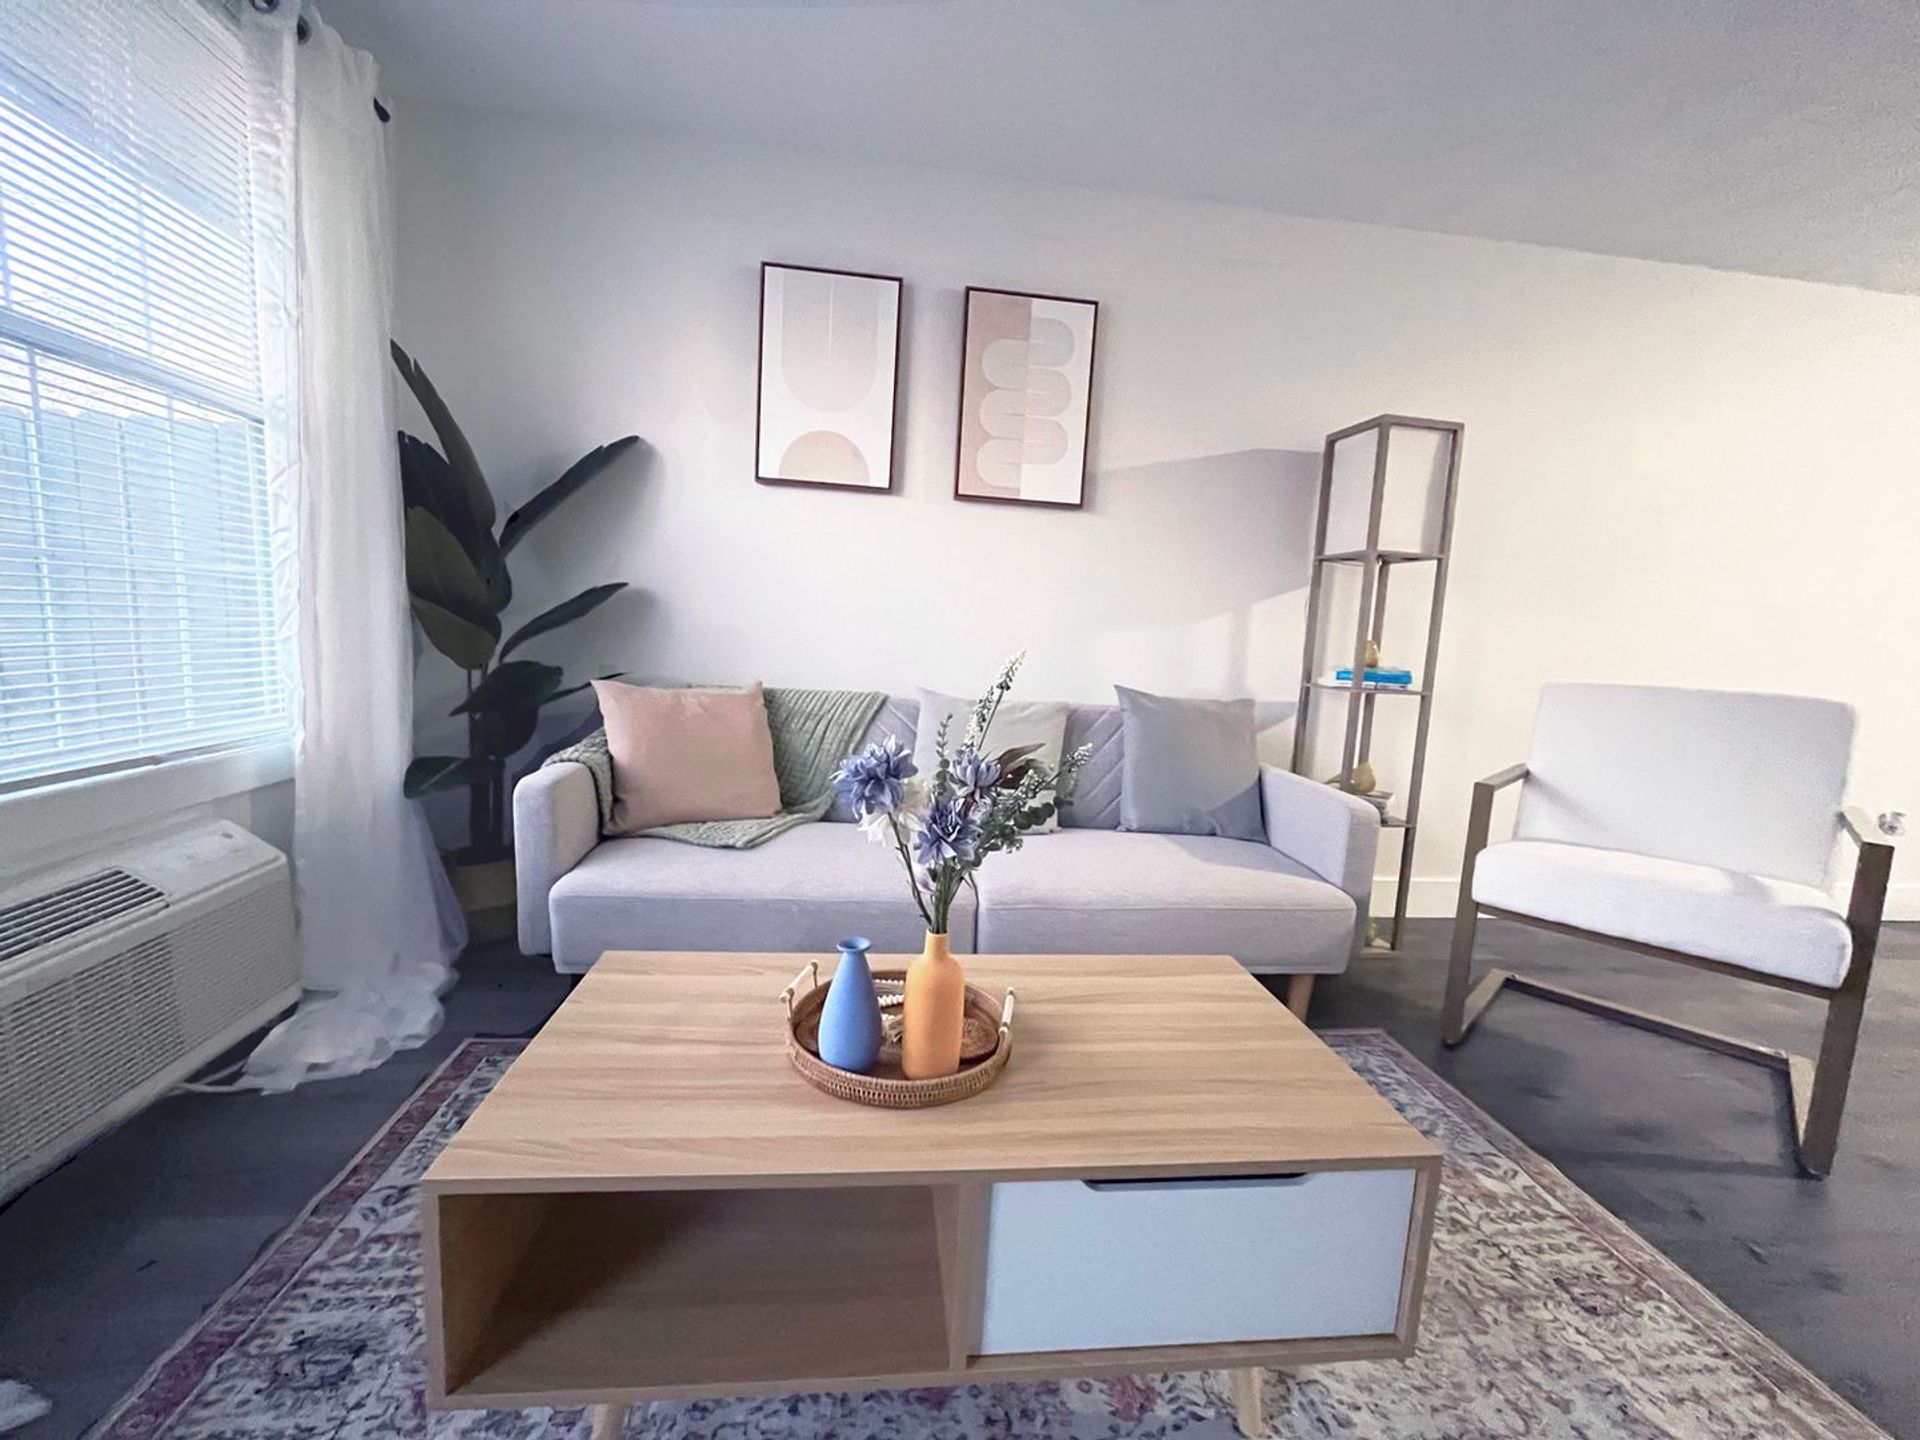 Studio Apartment with 1 Bath for Rent | Entirely Renovated Image